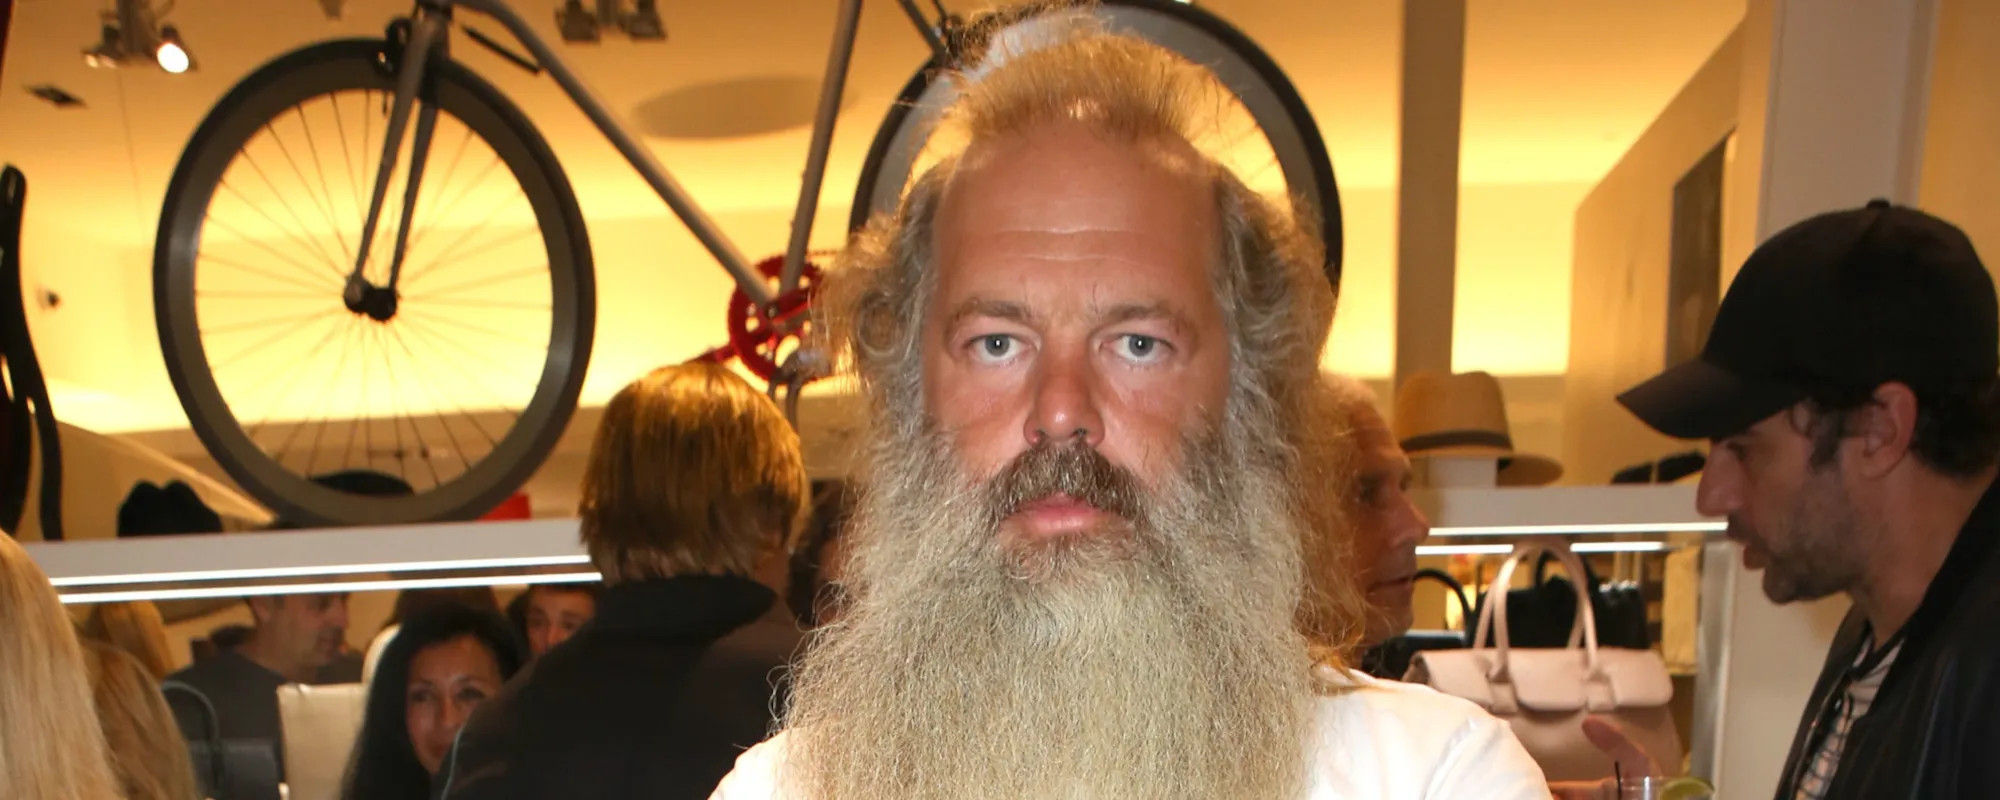 4 Classic Rock Songs You Didn’t Know Rick Rubin Produced